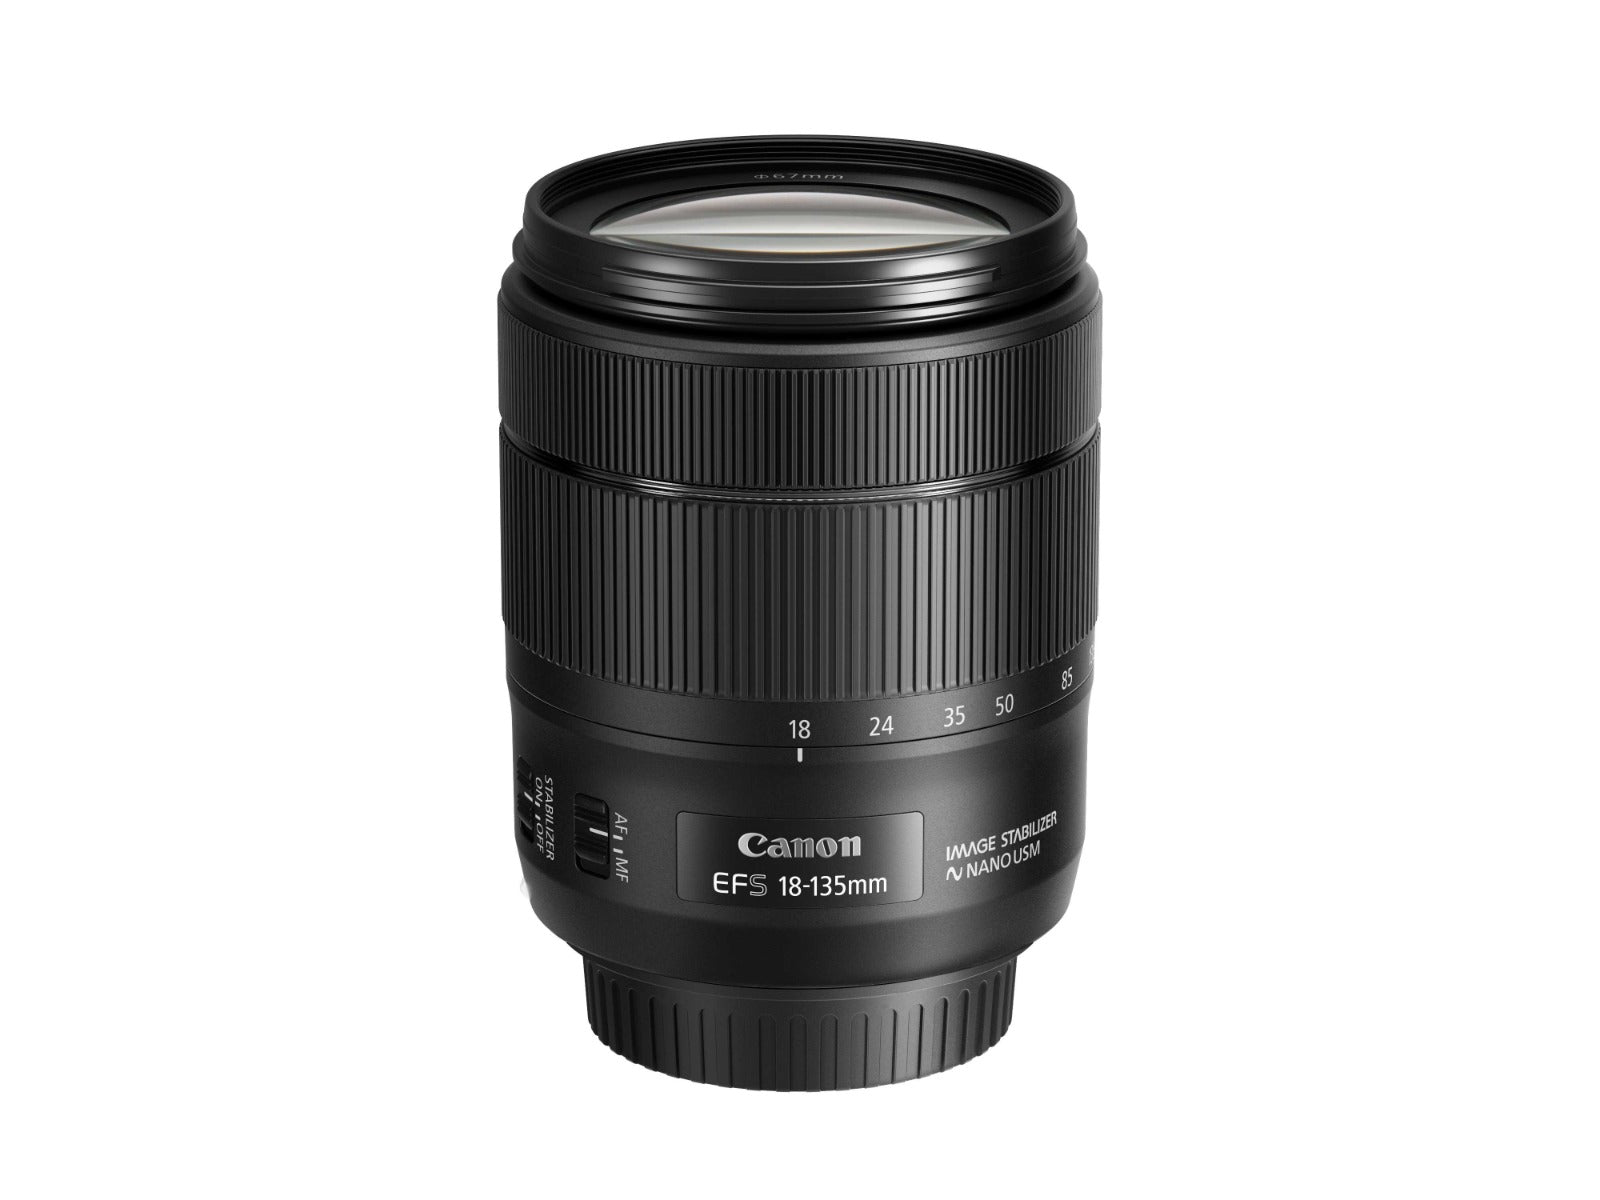 Canon 18-135MM EF-S f3.5-5.6 IS USM Lens - Product Photo 1